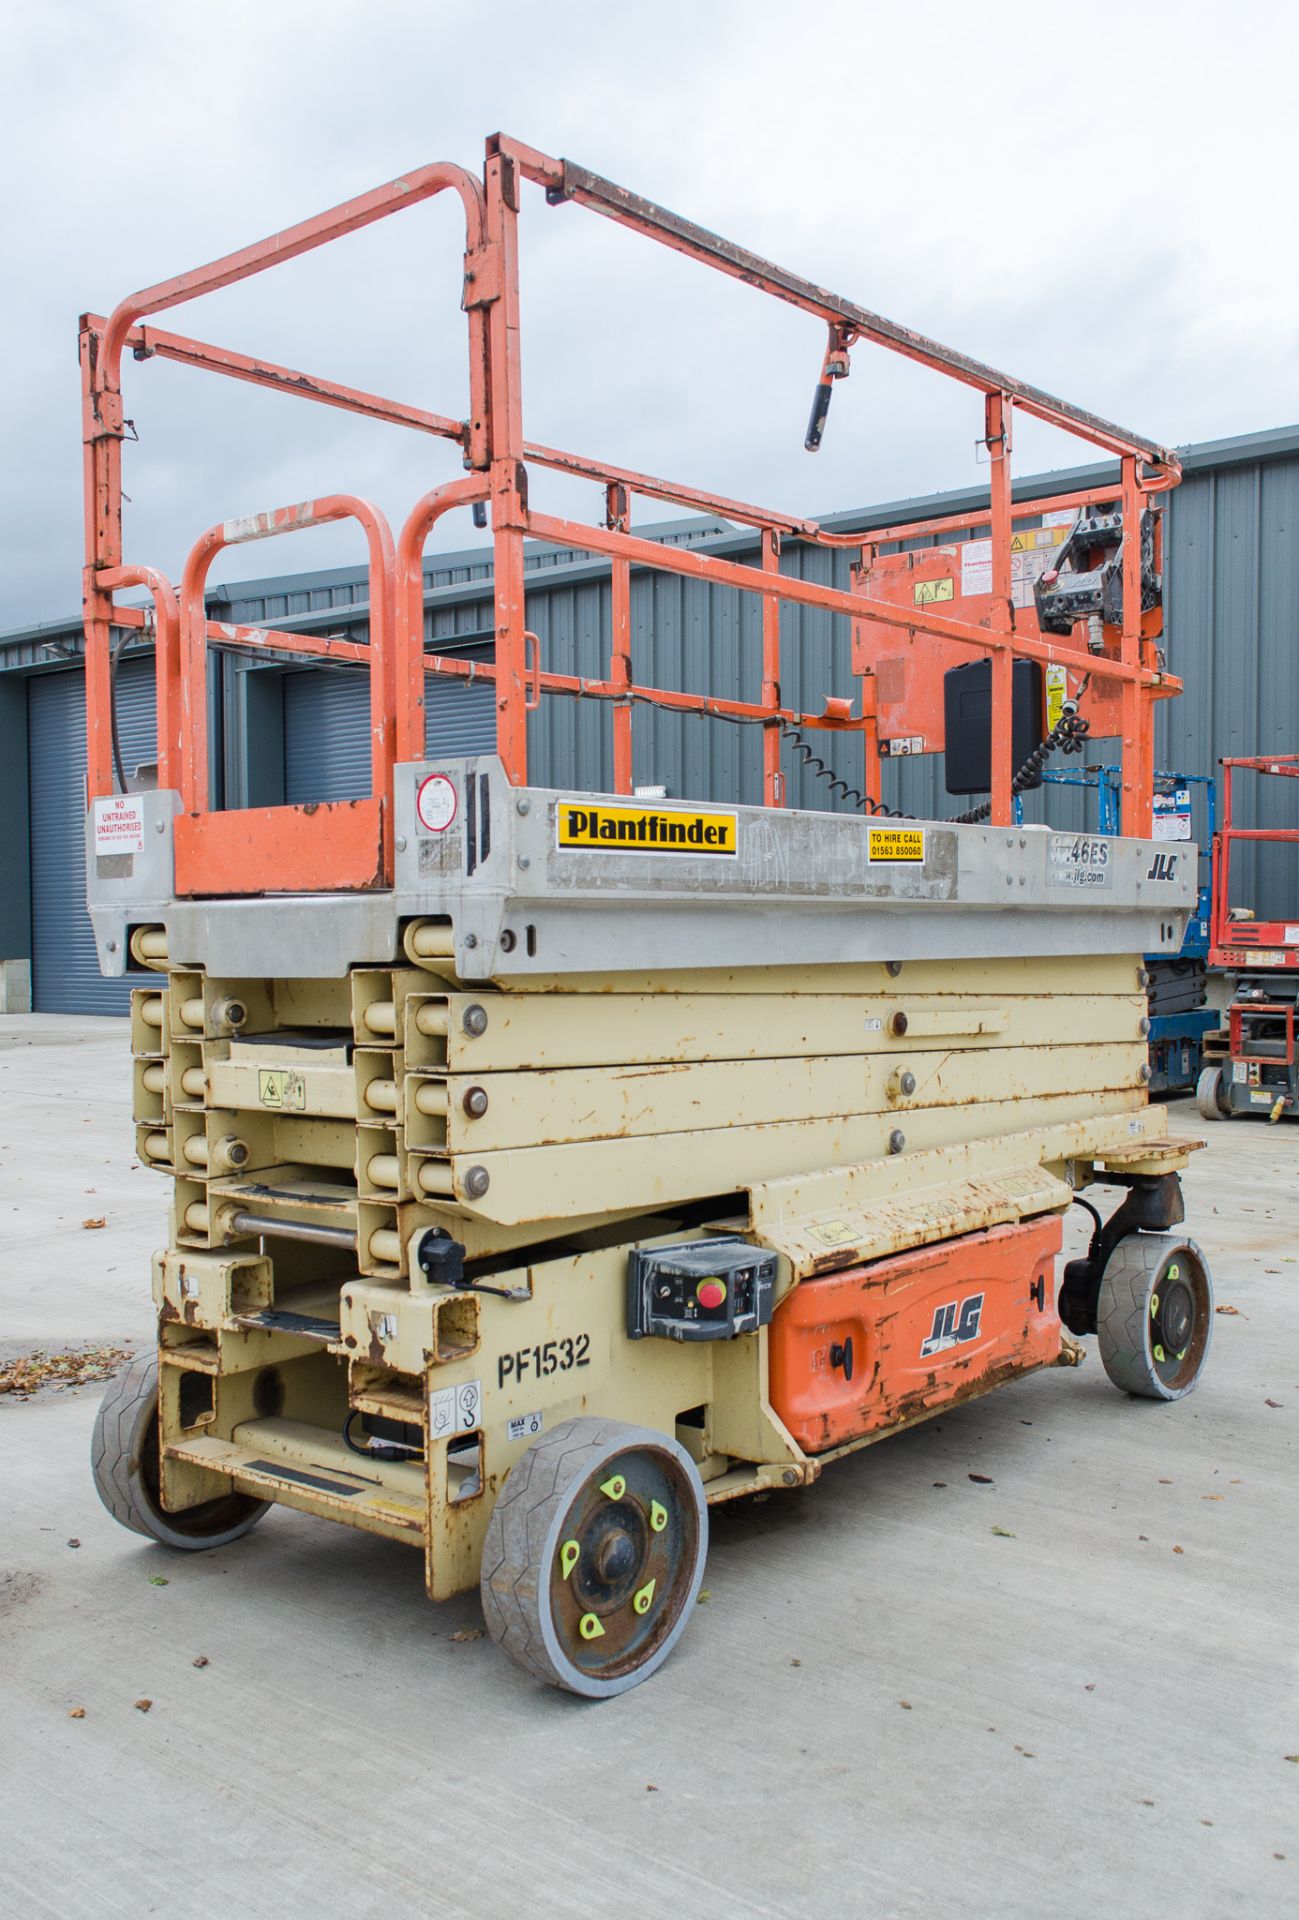 JLG 3246 ES battery electric scissor lift Year:- 2011 S/N: 2037 Recorded hours:- 416 PF1532